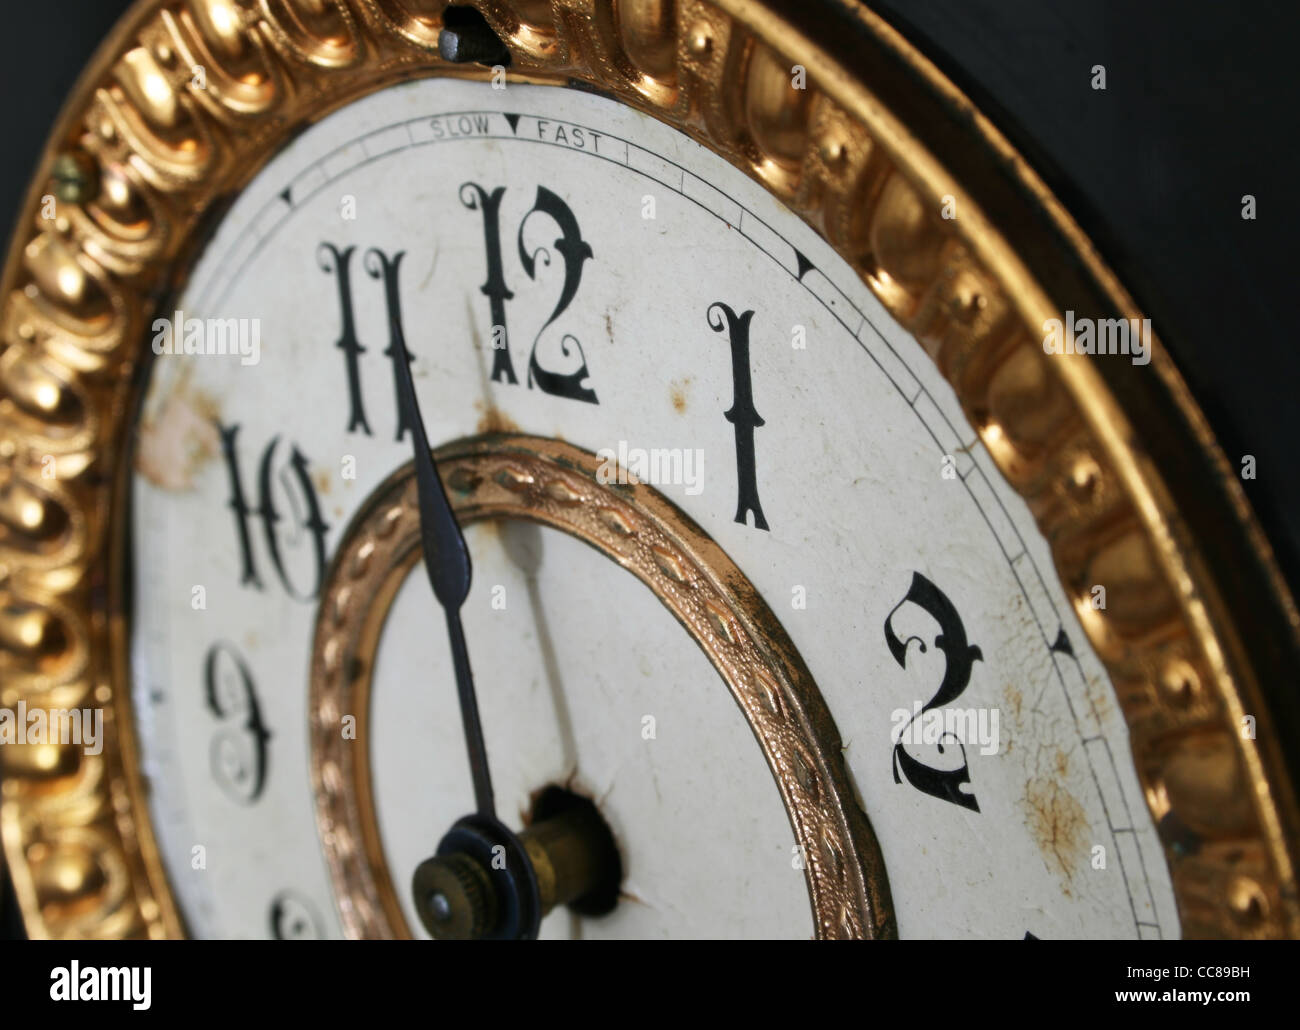 almost 11:30 on an antique clock viewed from an angle with a shallow depth of field Stock Photo